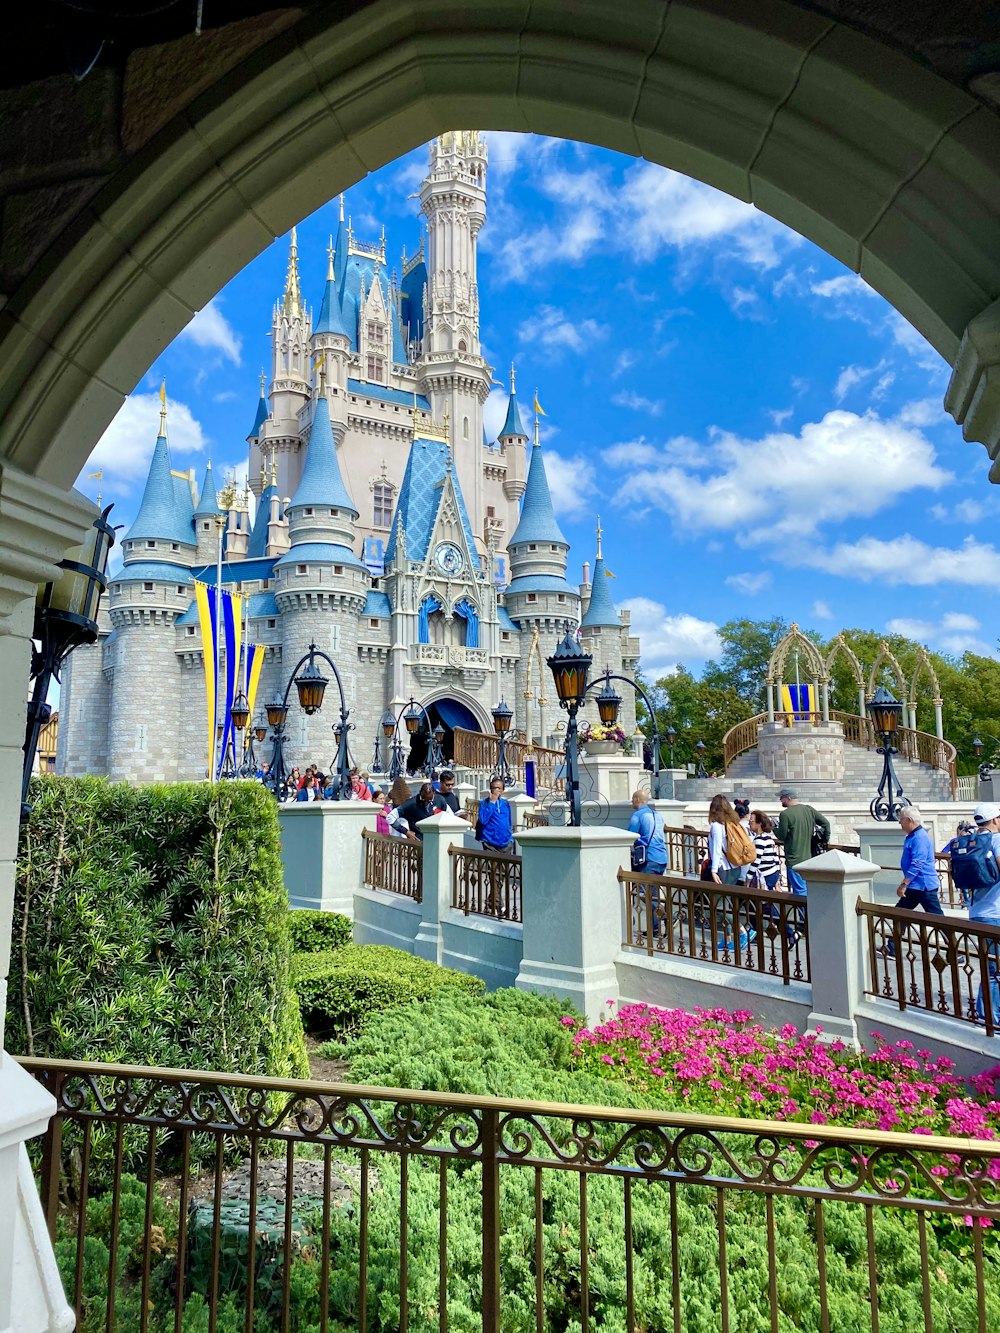 500+ Disney World Pictures | Download